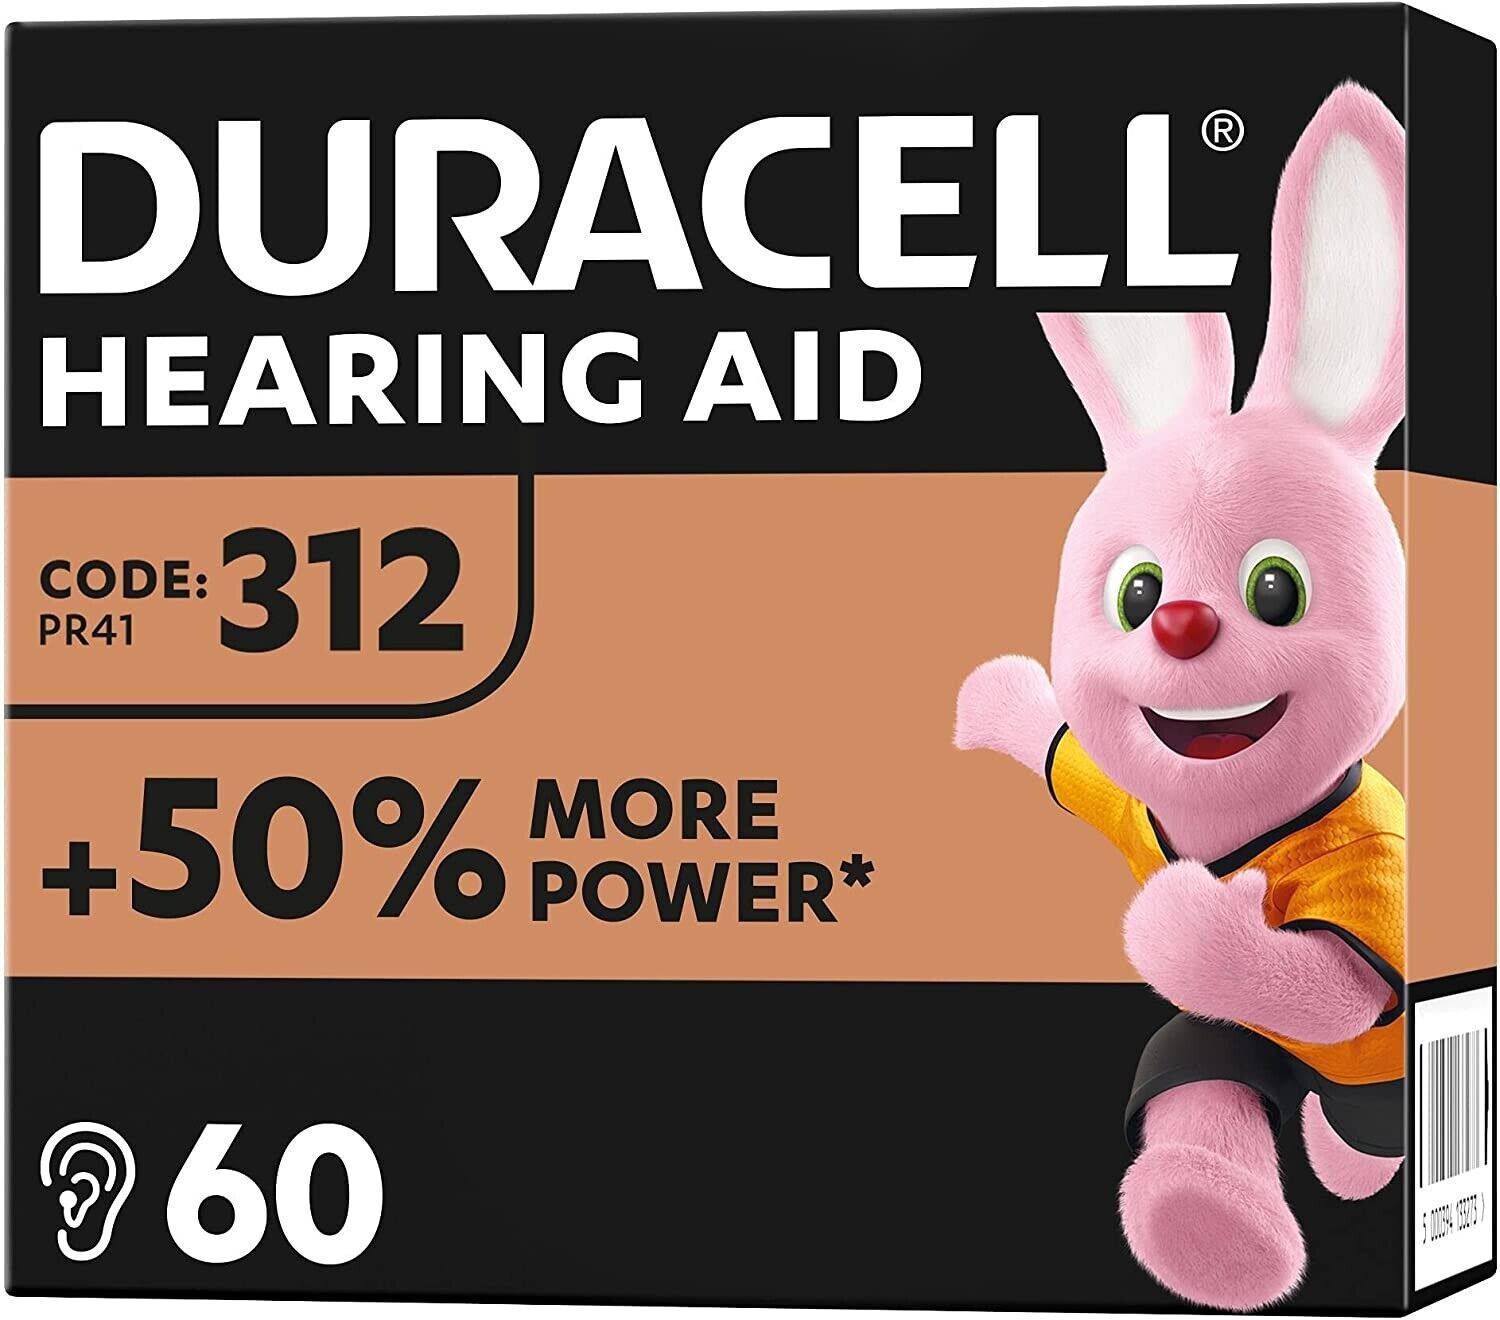 Duracell ACTIVAIR Hearing Aid Batteries [312] 6 Capsules DURACELL Mercury-Free Batteries Made in Germany Parallel Import